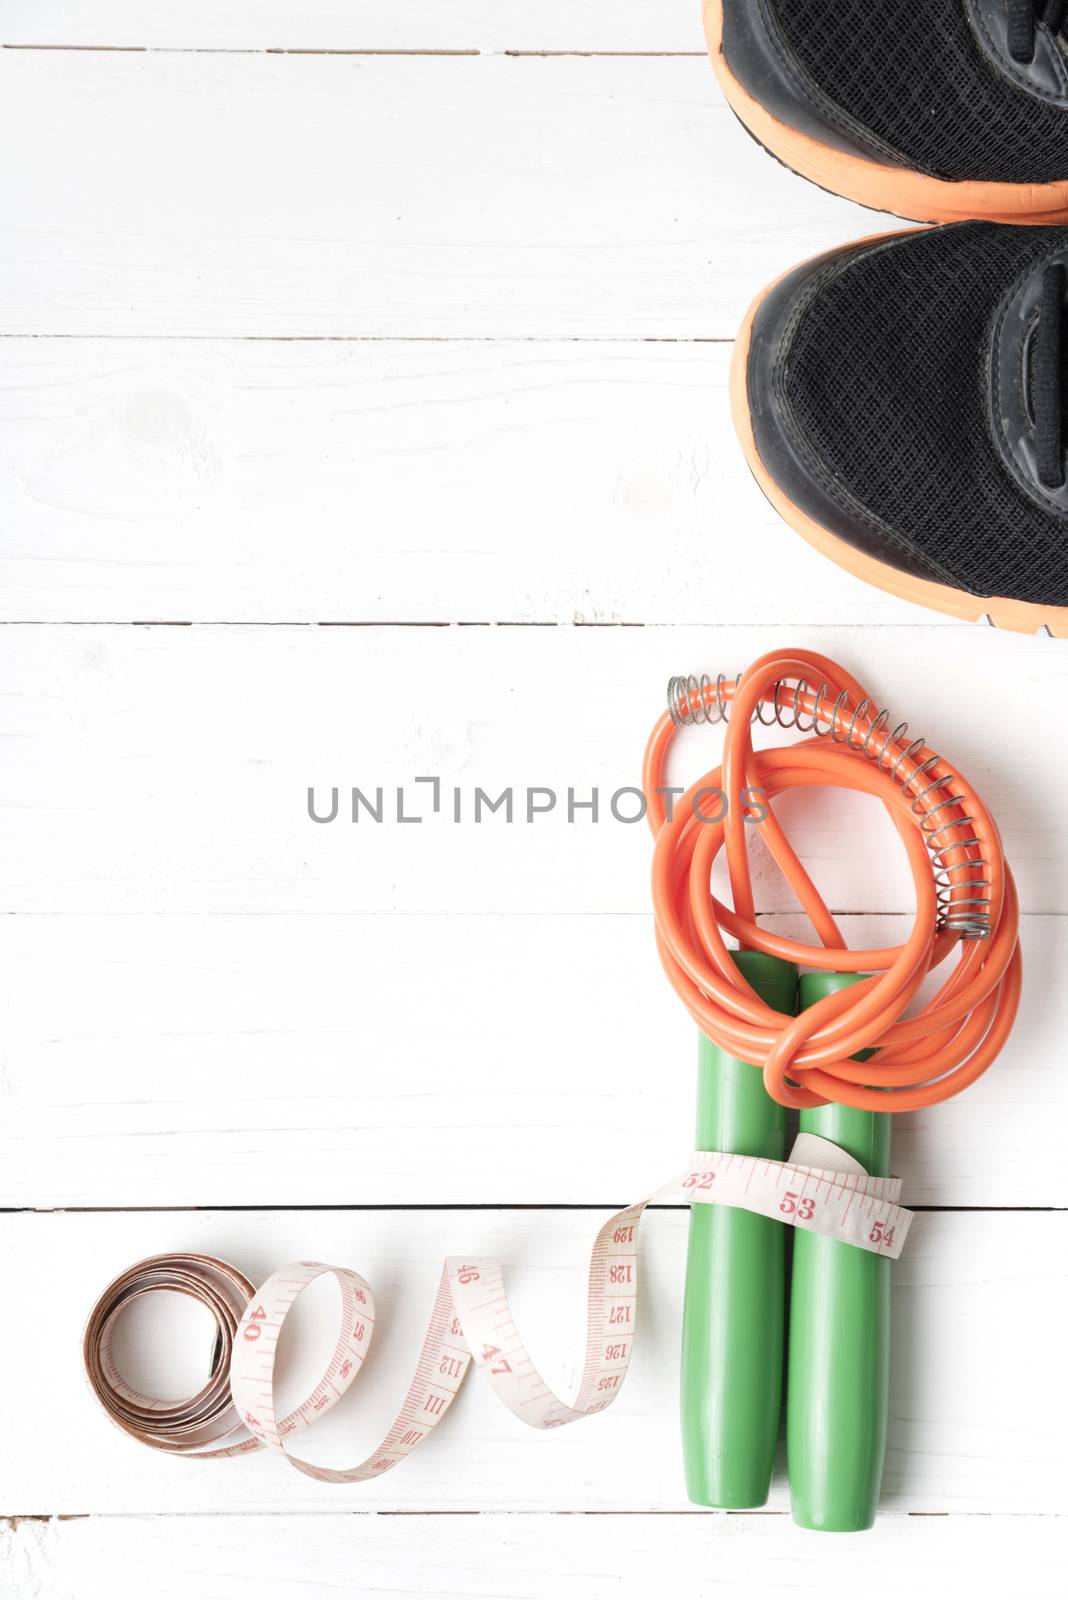 fitness equipment : running shoes,jumping rope and measuring tape on white wood table